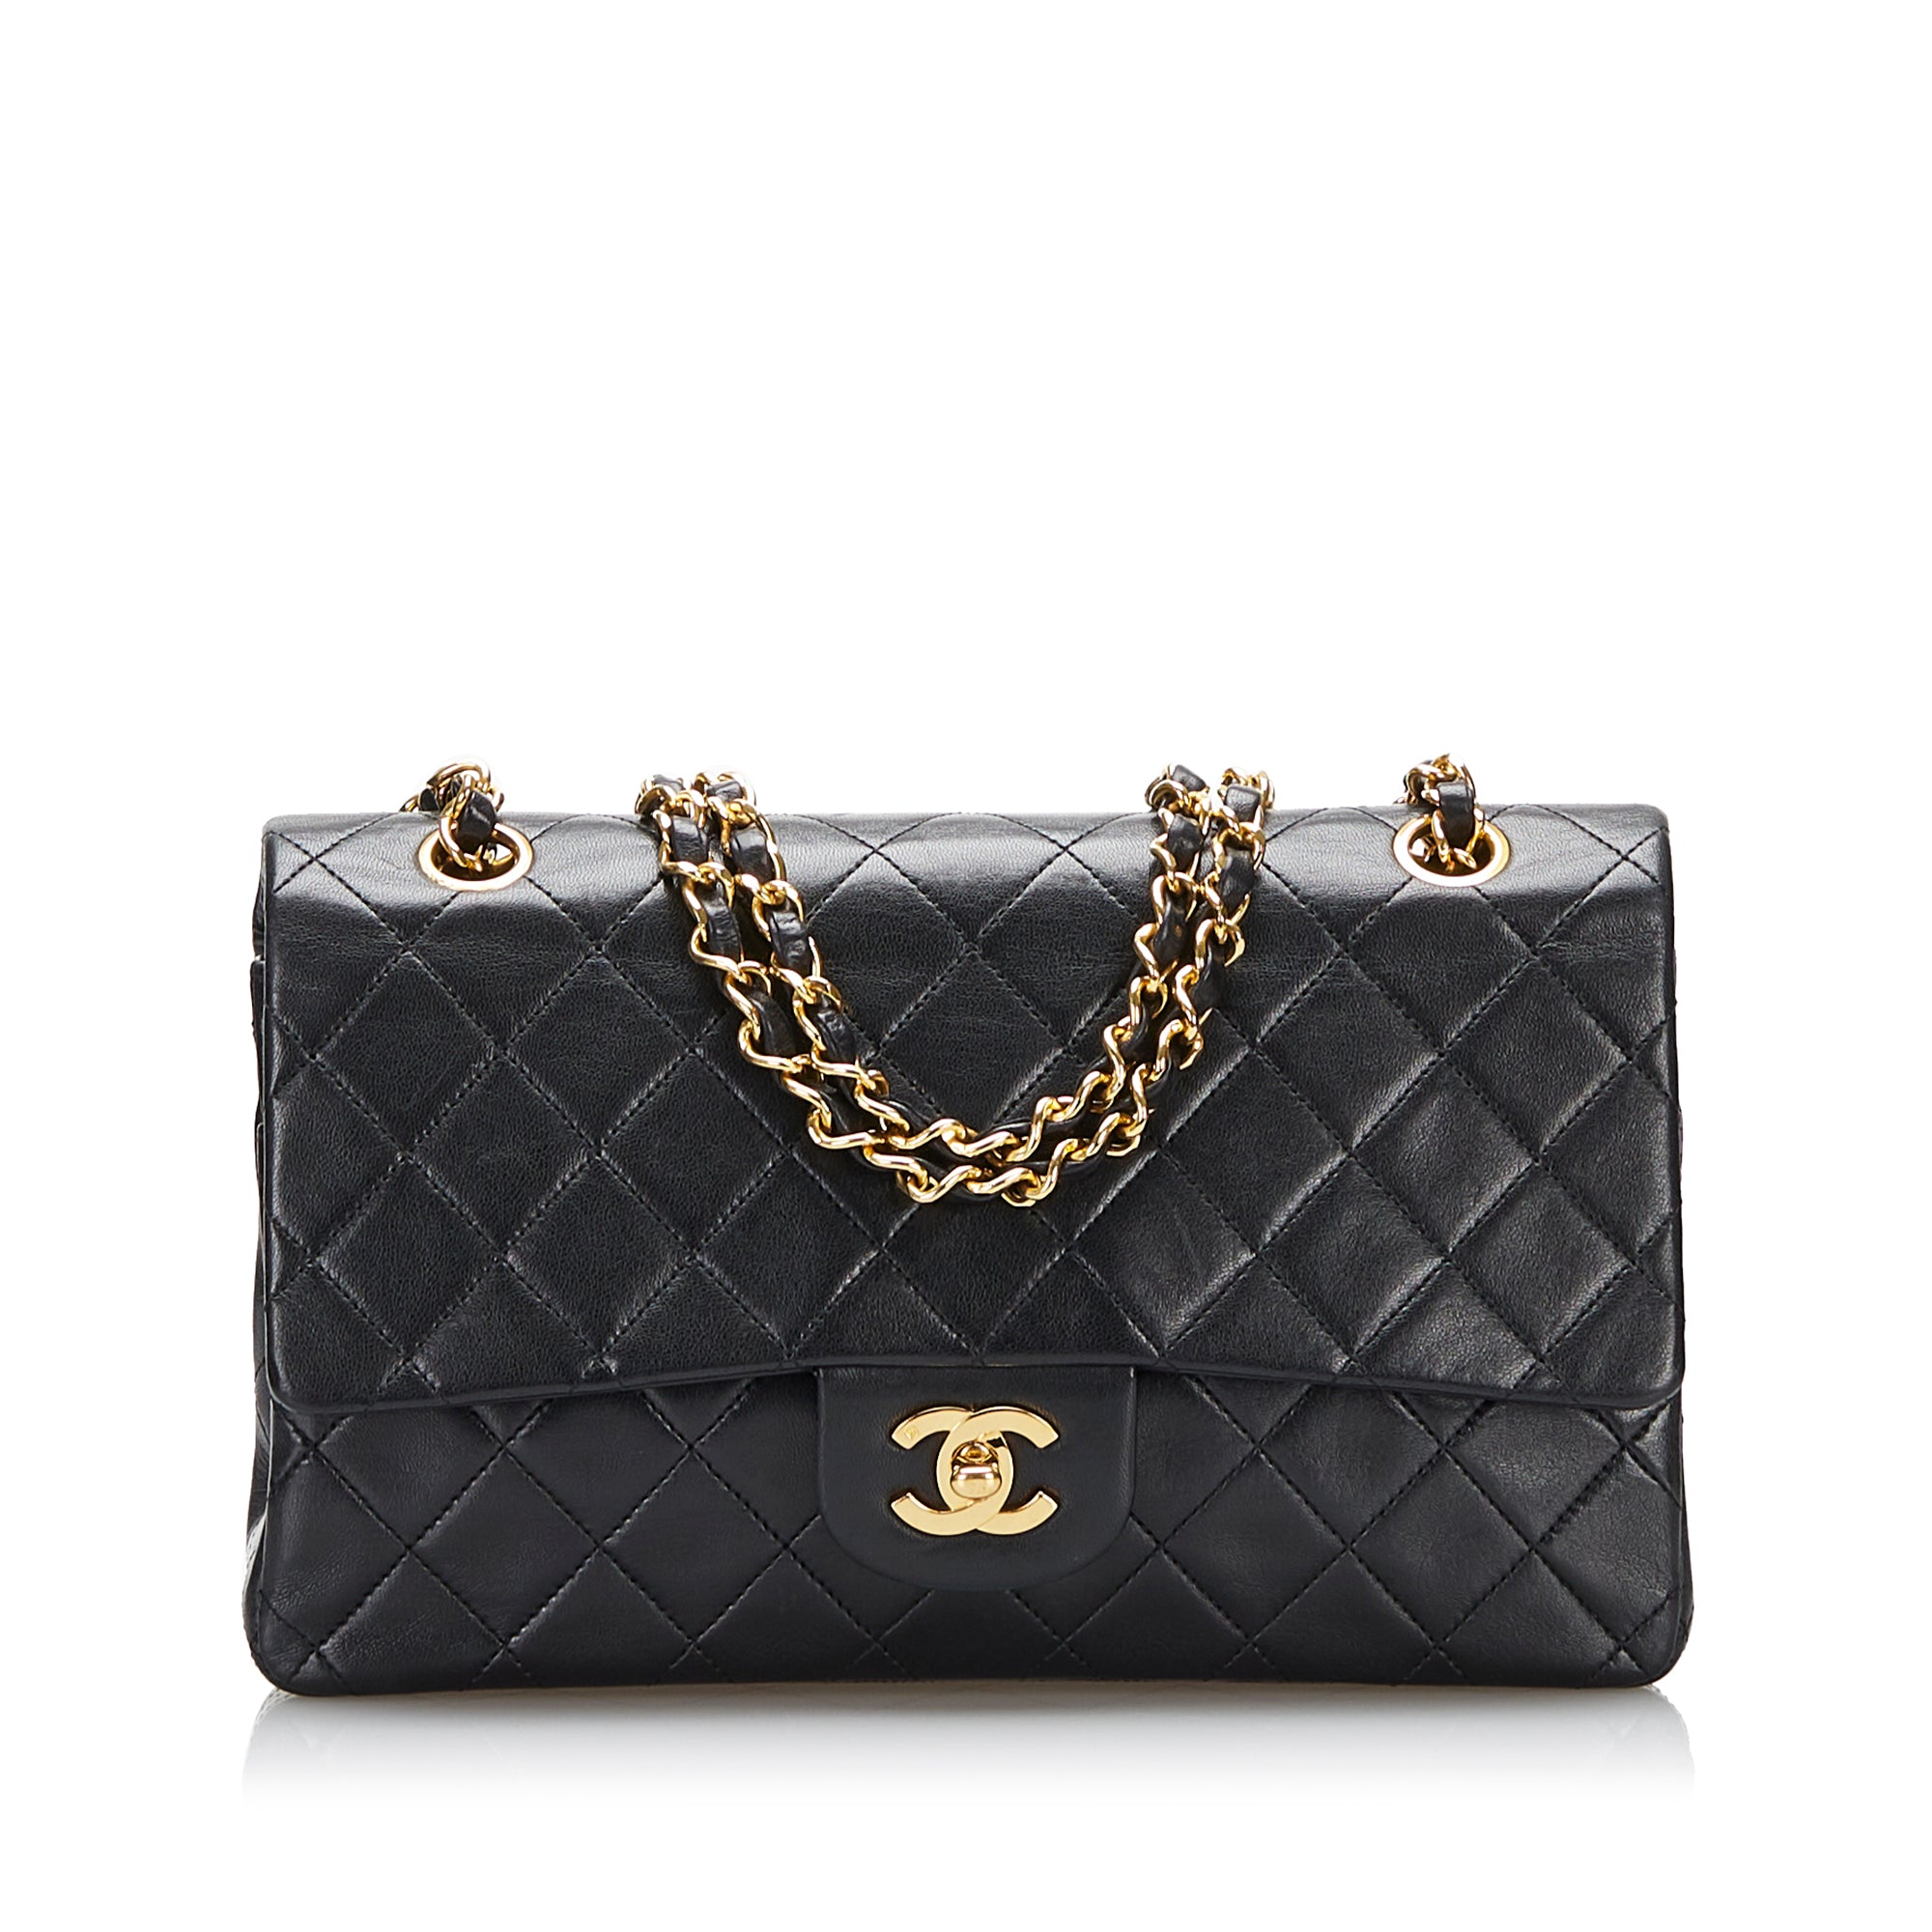 CHANEL Chanel Classic Double Flap Bag Quilted Lambskin Medium Black - Vault 55